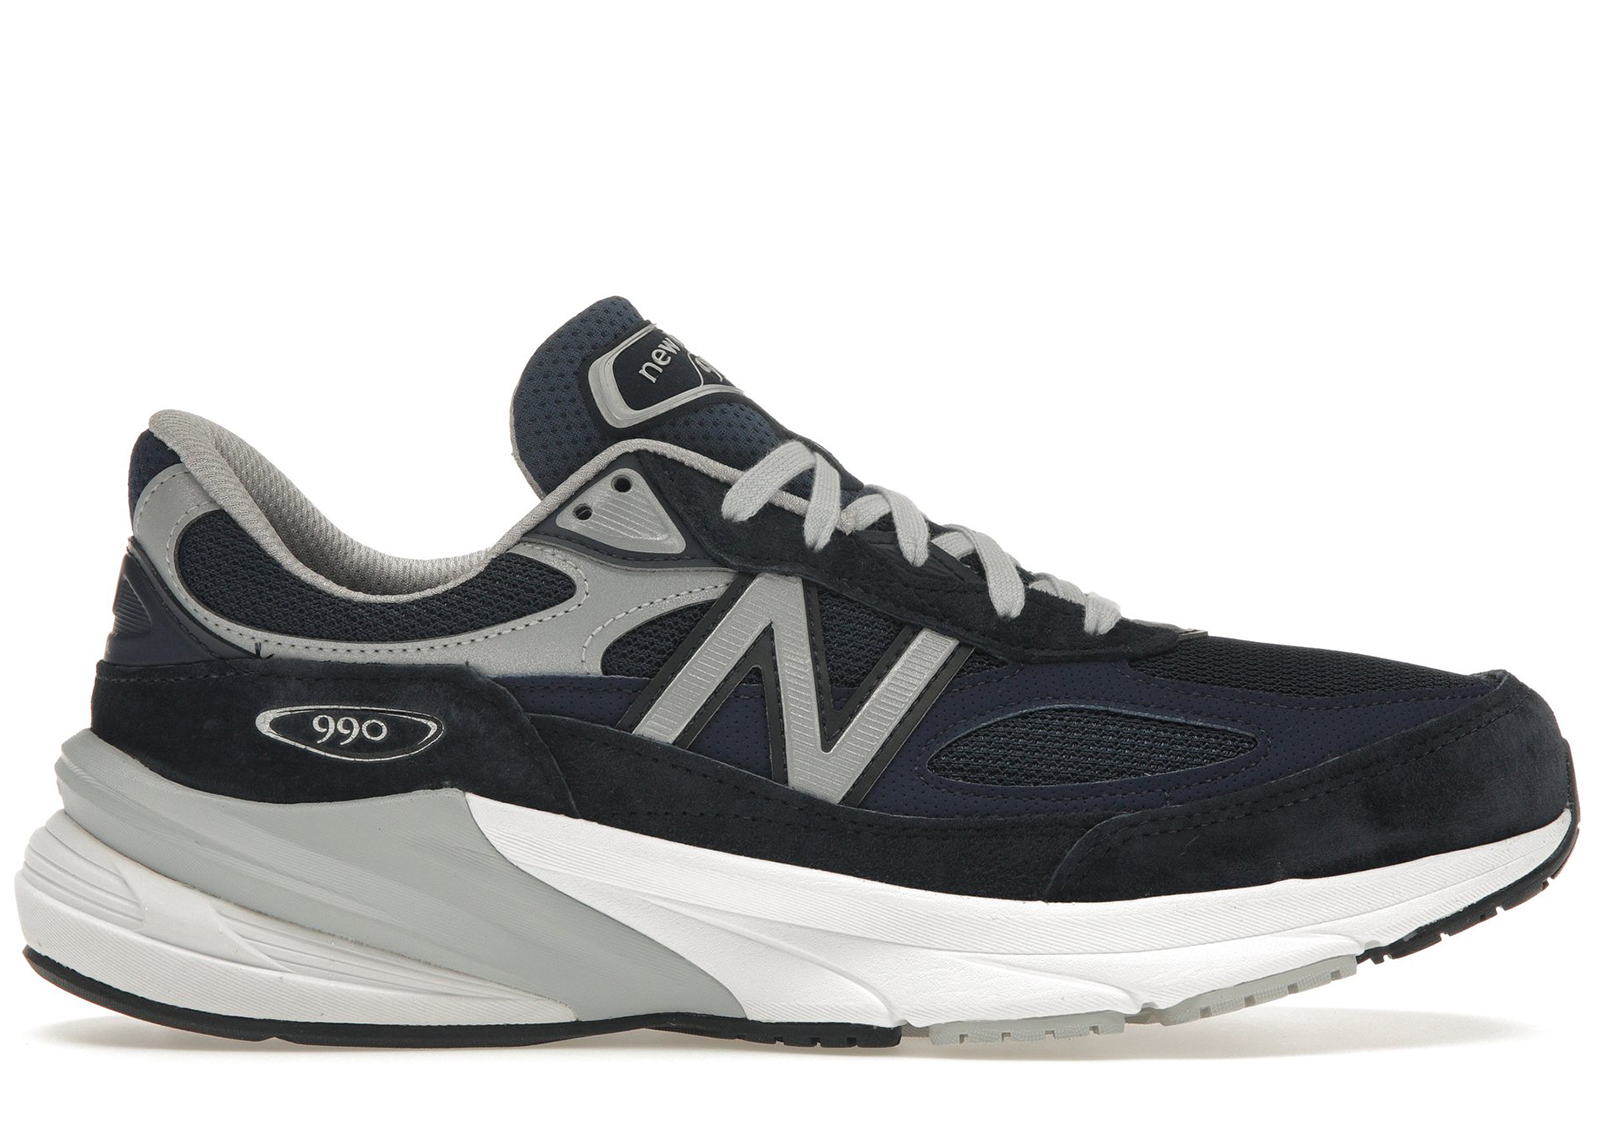 Buy New Balance 990v6 Shoes & New Sneakers - StockX